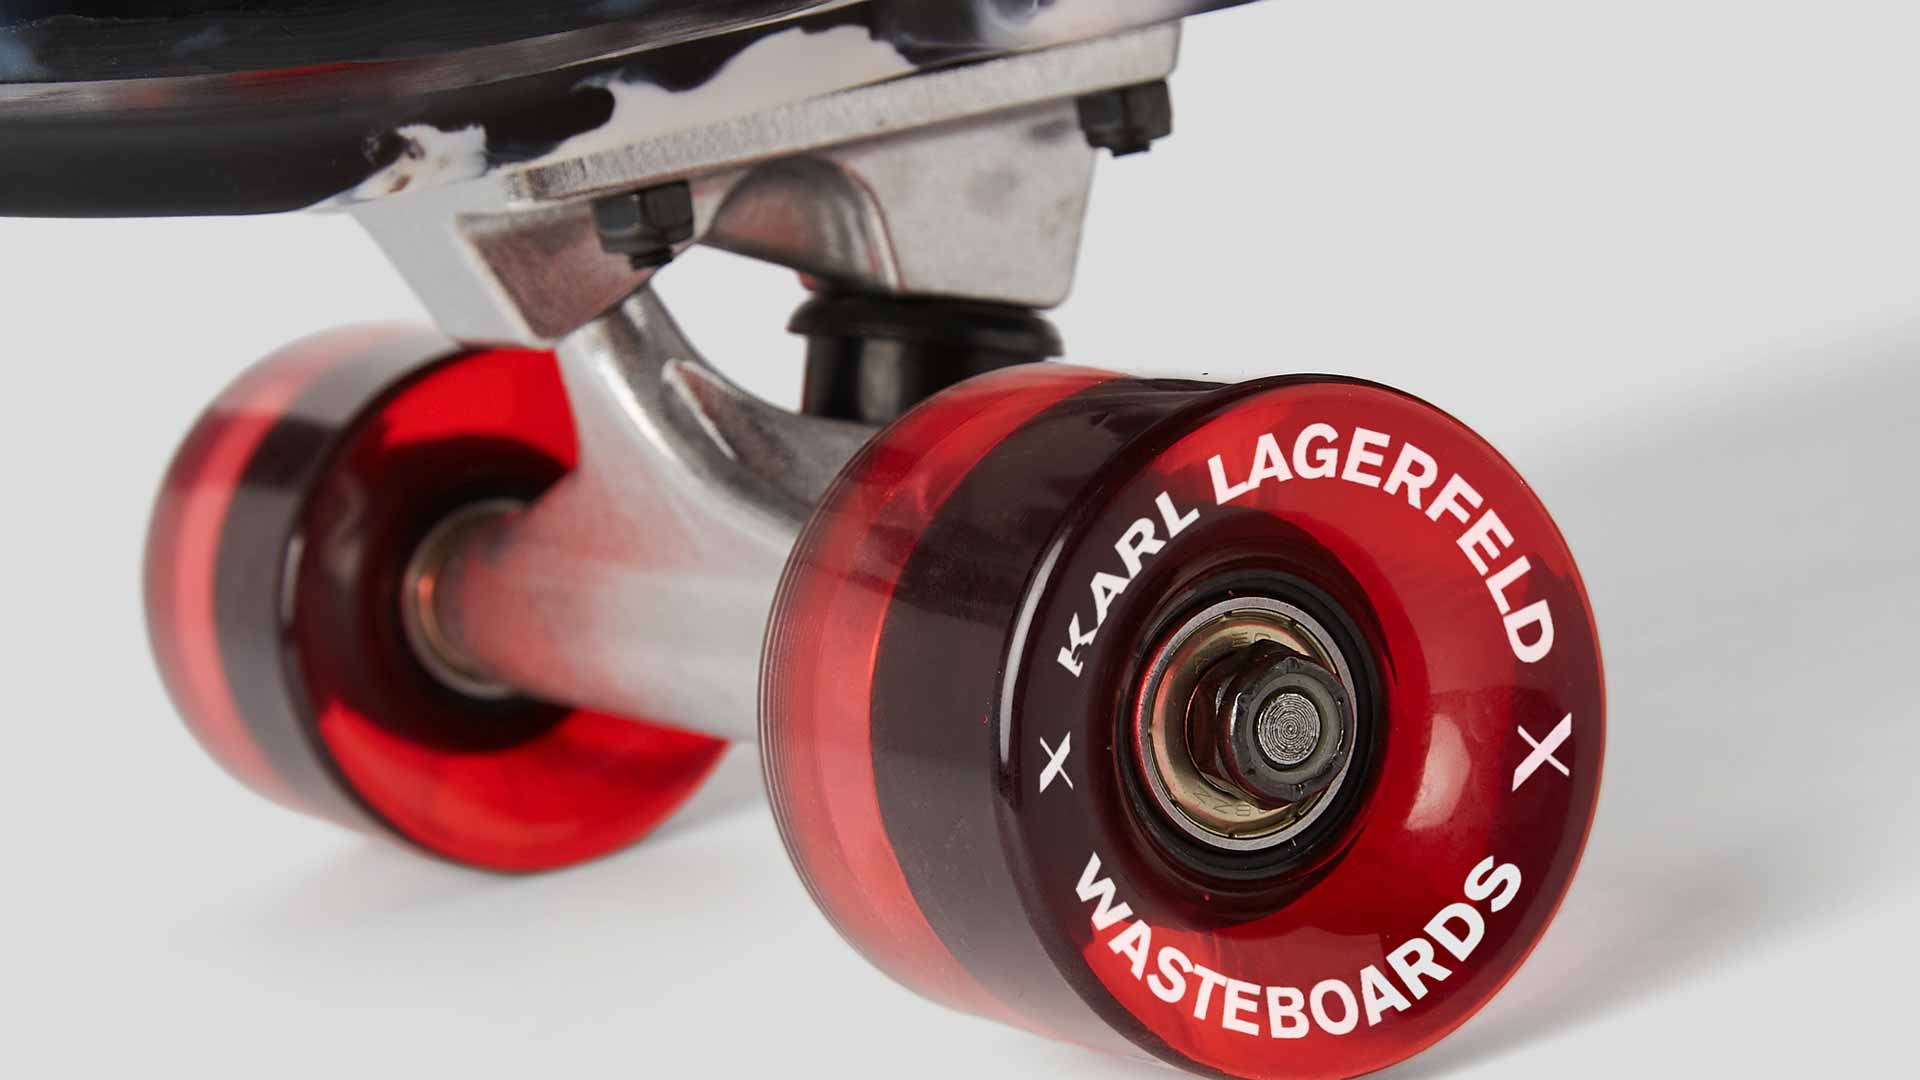 KARL LAGERFELD skateboard, born from collaboration between Karl Lagerfeld and Wasteboards